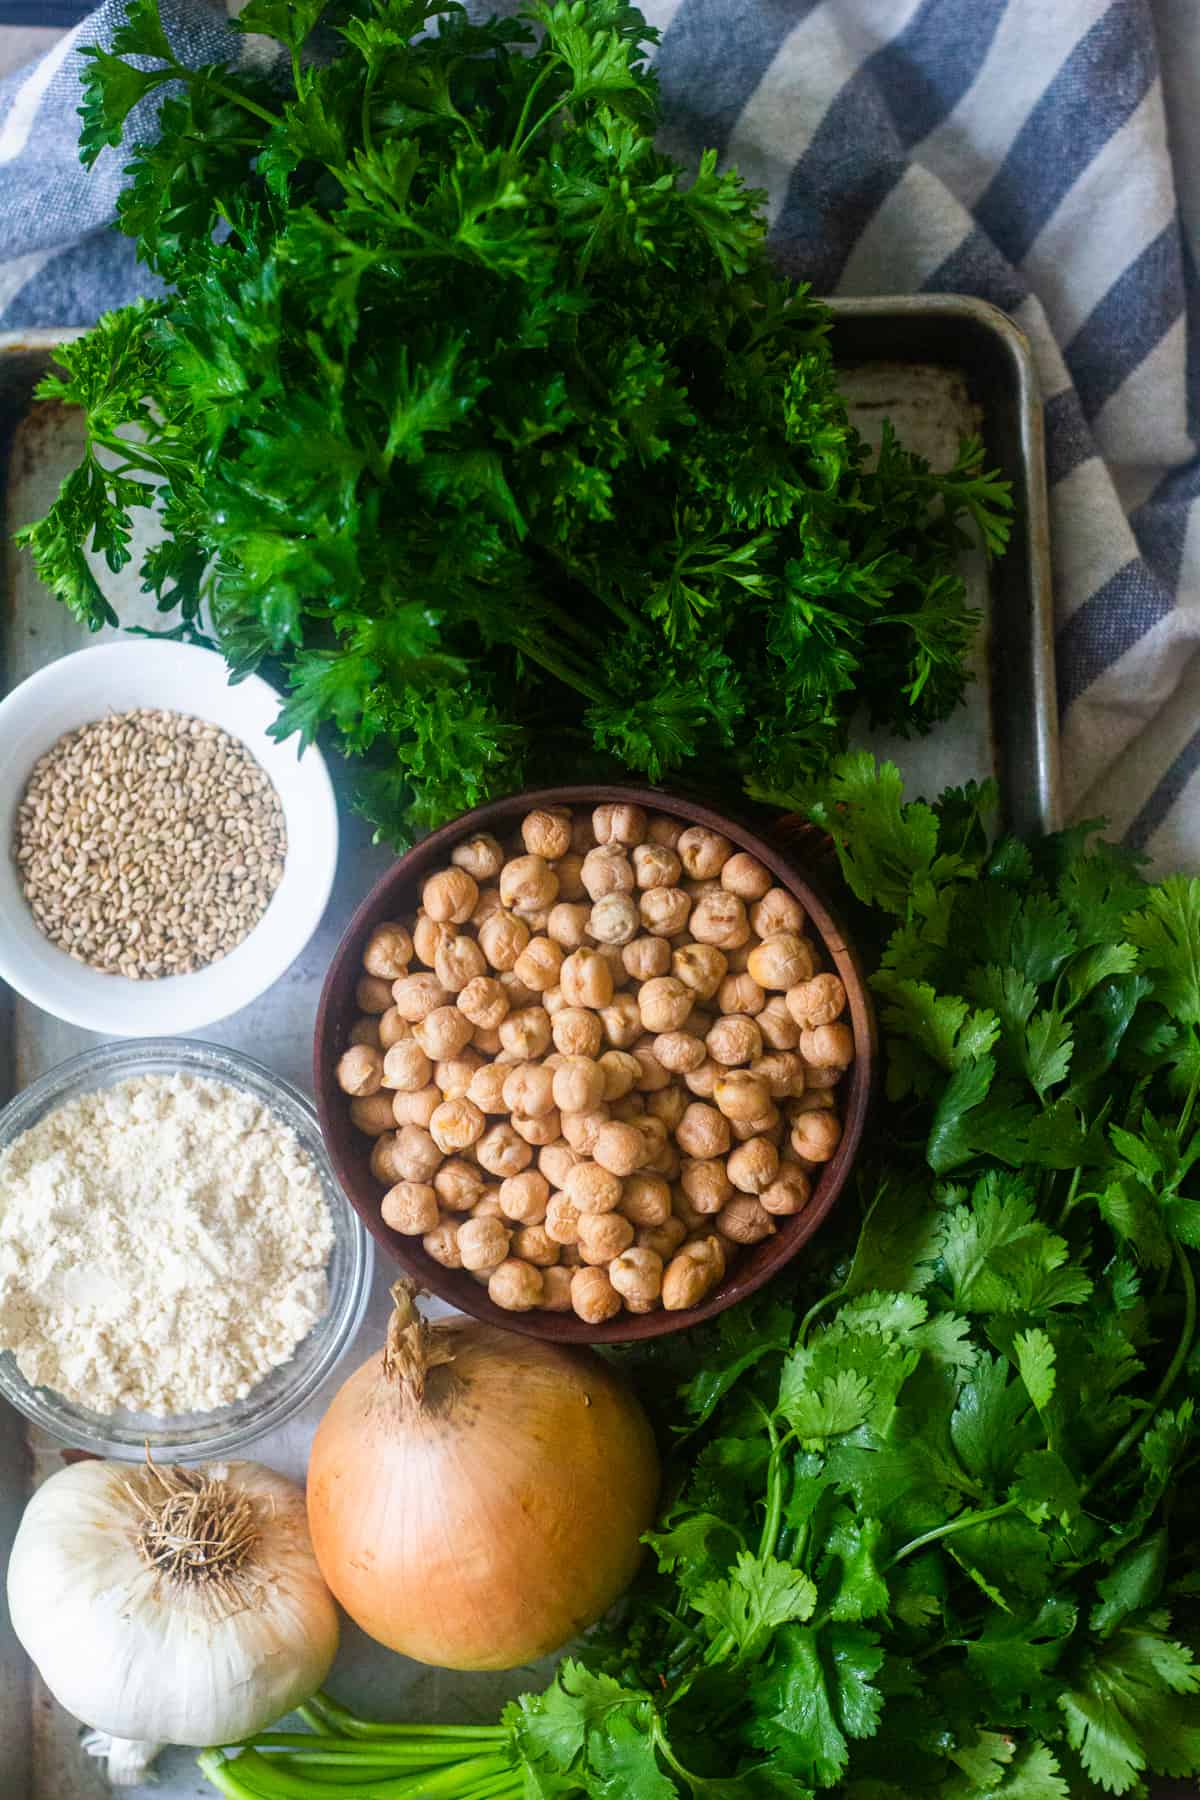 Falafel ingredients are chickpea, parsley, cilantro, onion, garlic, sesame seeds and chickpea flour. 